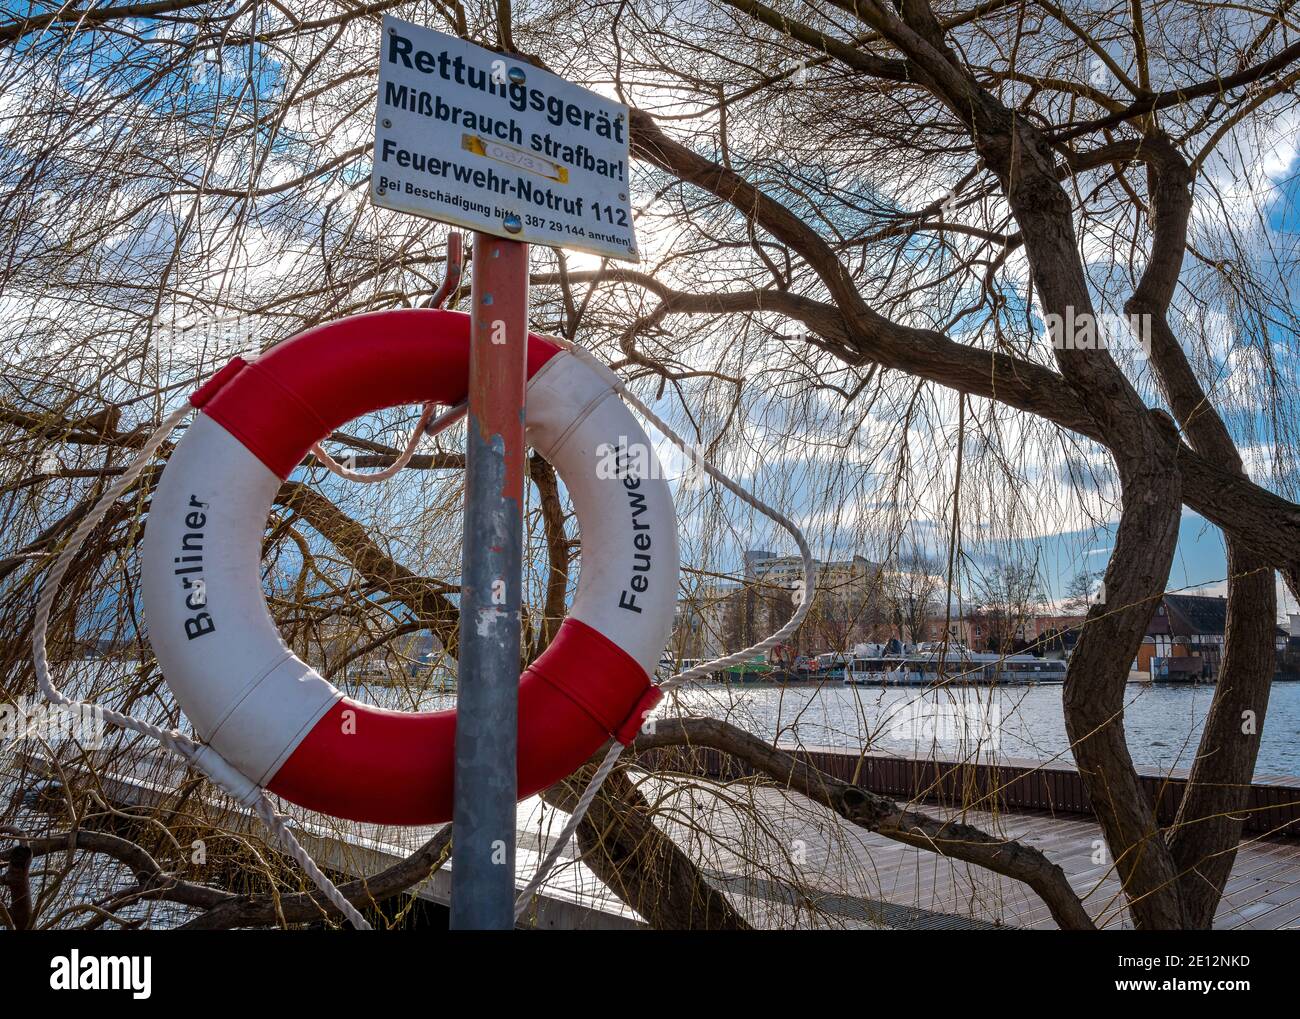 Lifebuoy Of The Berlin Fire Department On The Banks Of The Havel In The District Of Spandau, Germany Stock Photo